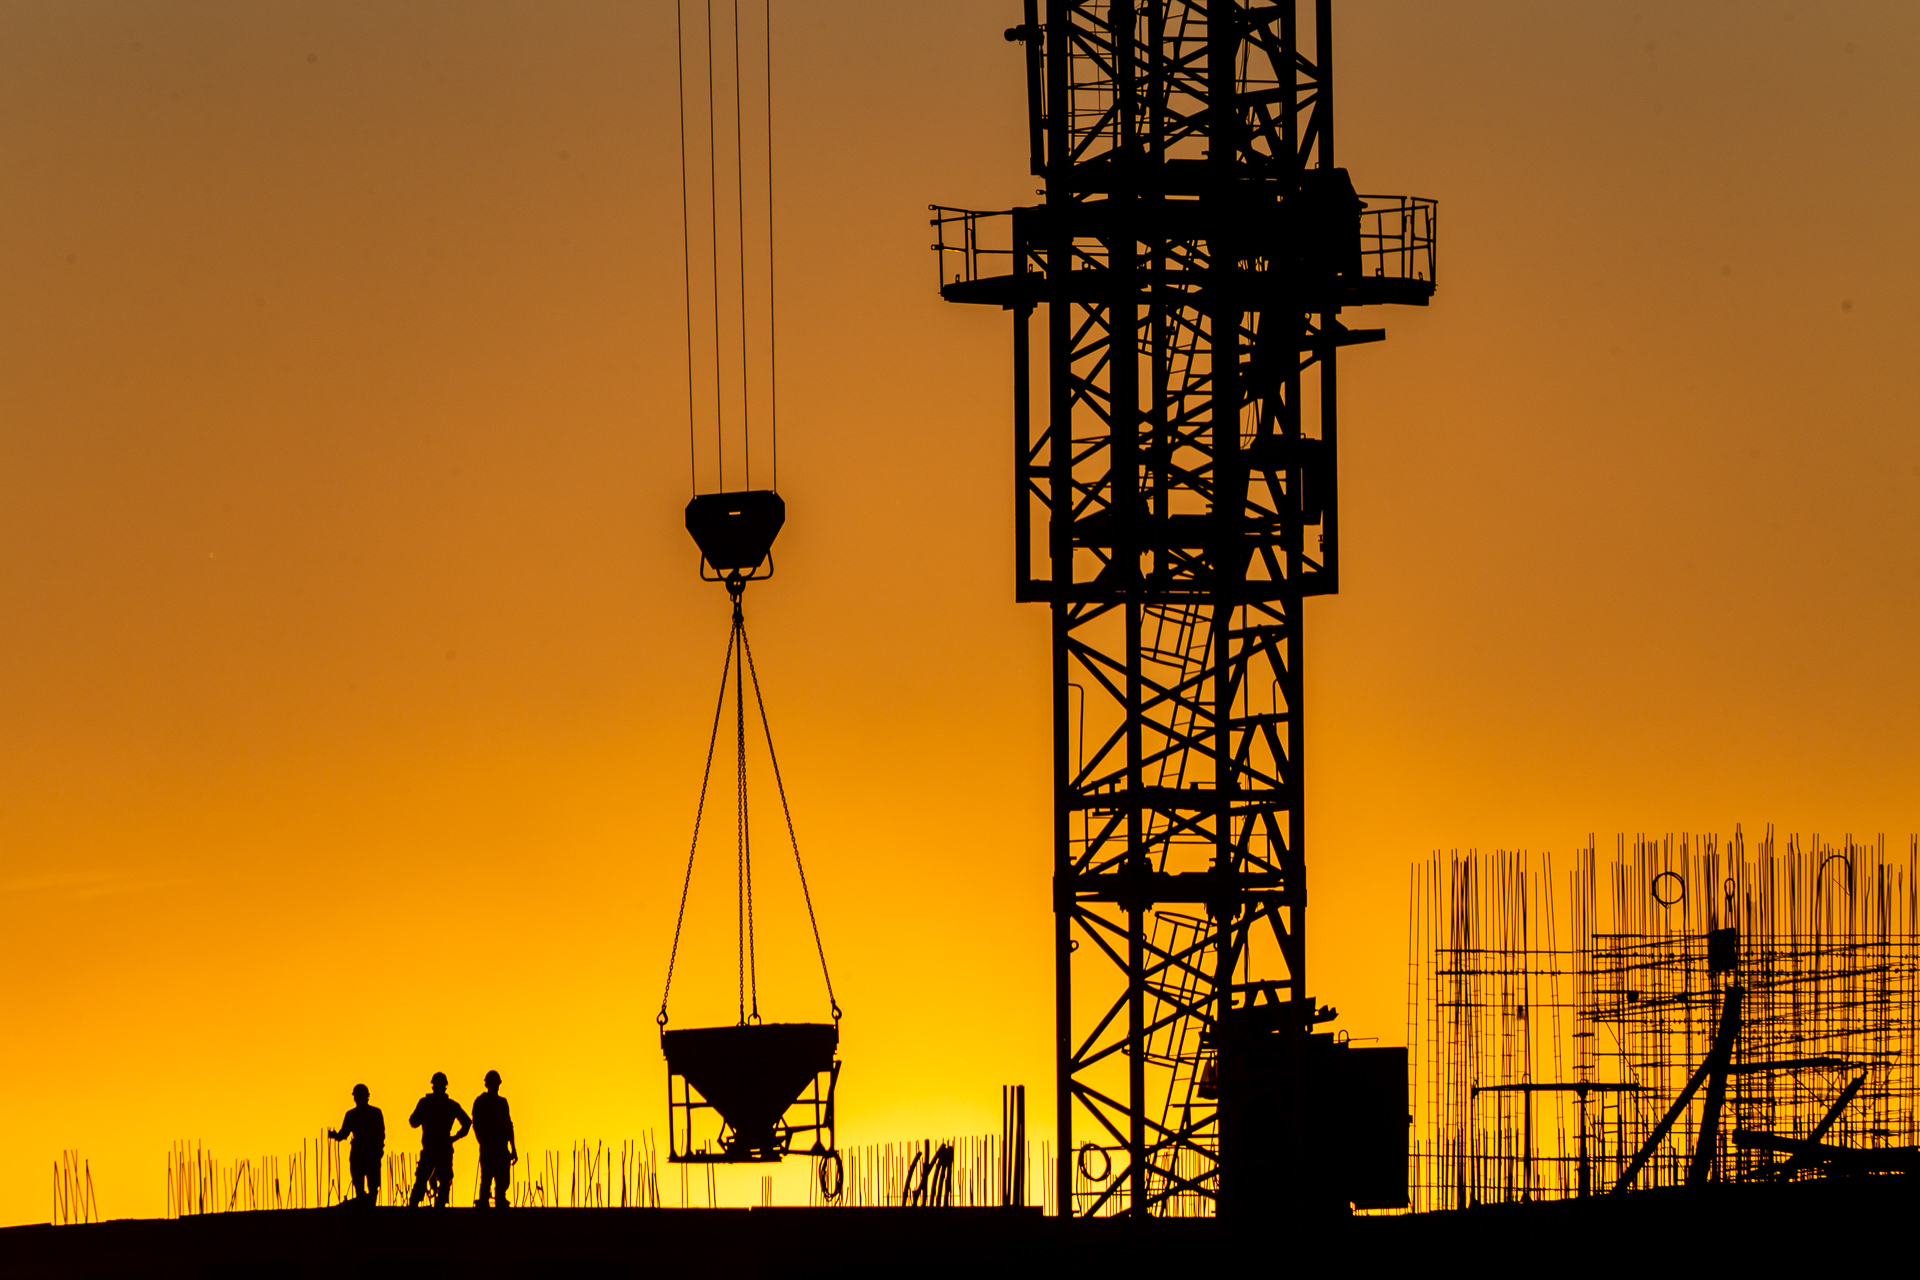 Architecture Photography Workers Silhouette Construction Site People Men Steel Beam Cranes Machine W 1920x1280